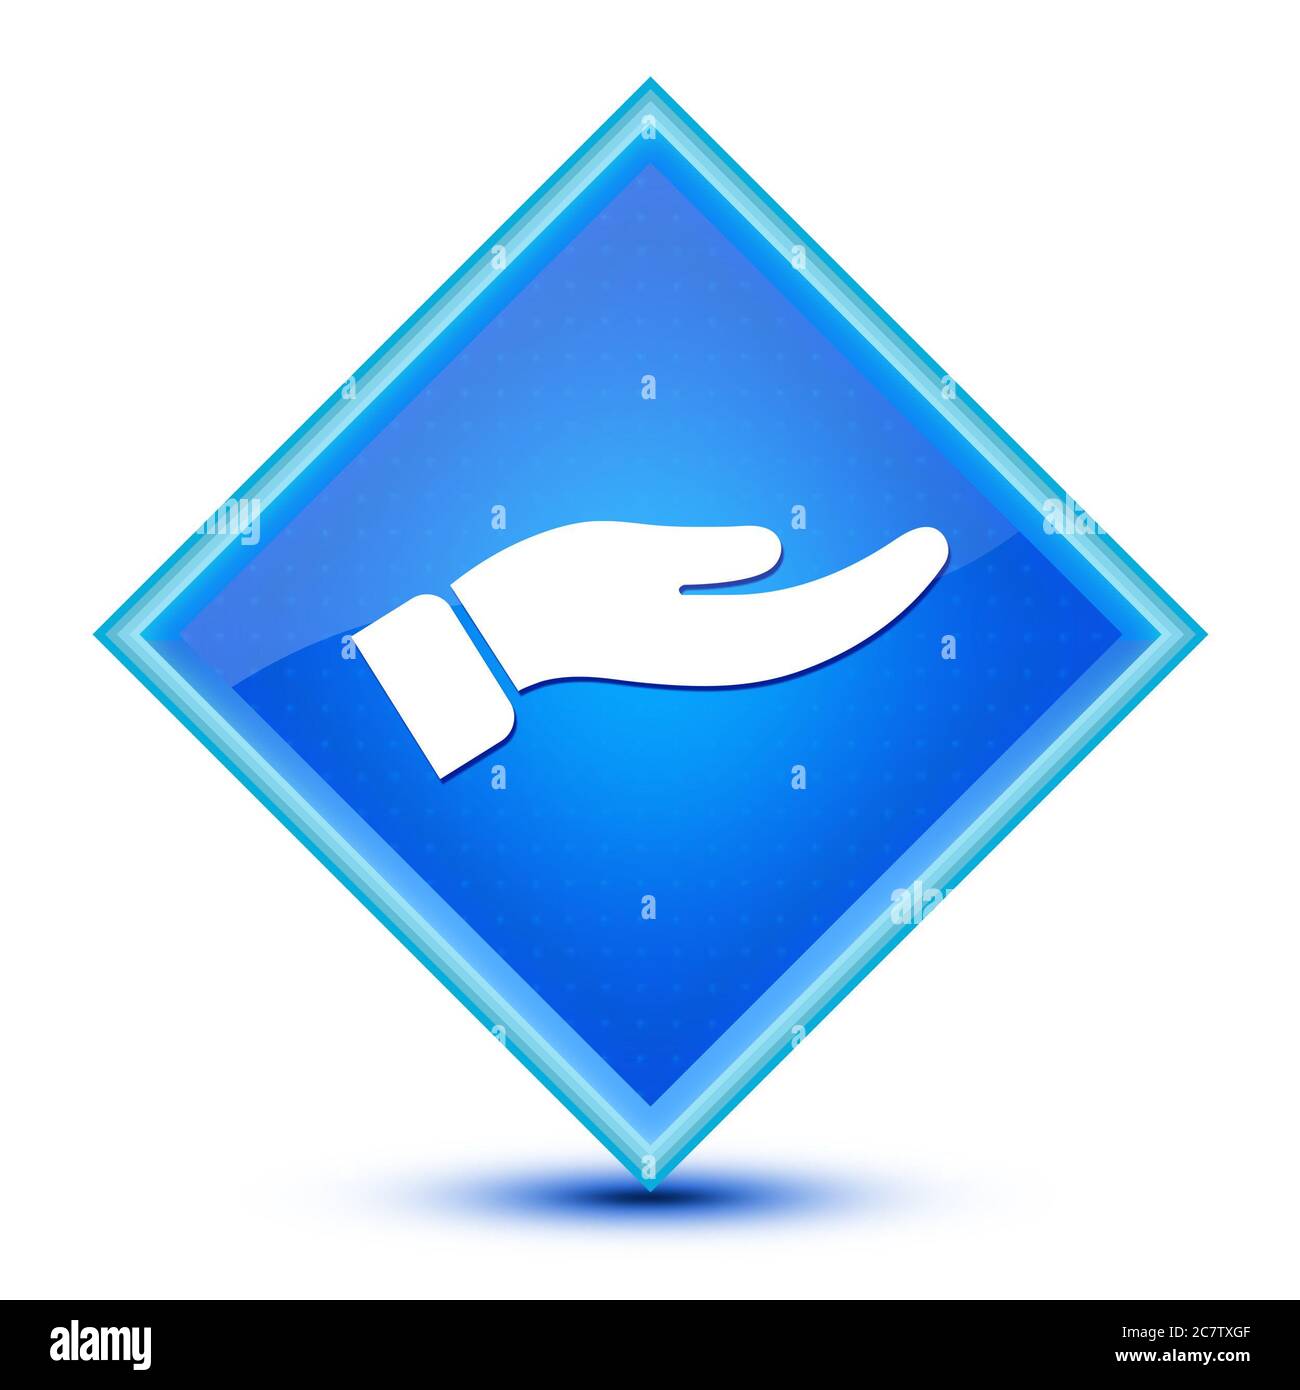 Hand icon isolated on special blue diamond button abstract illustration Stock Photo